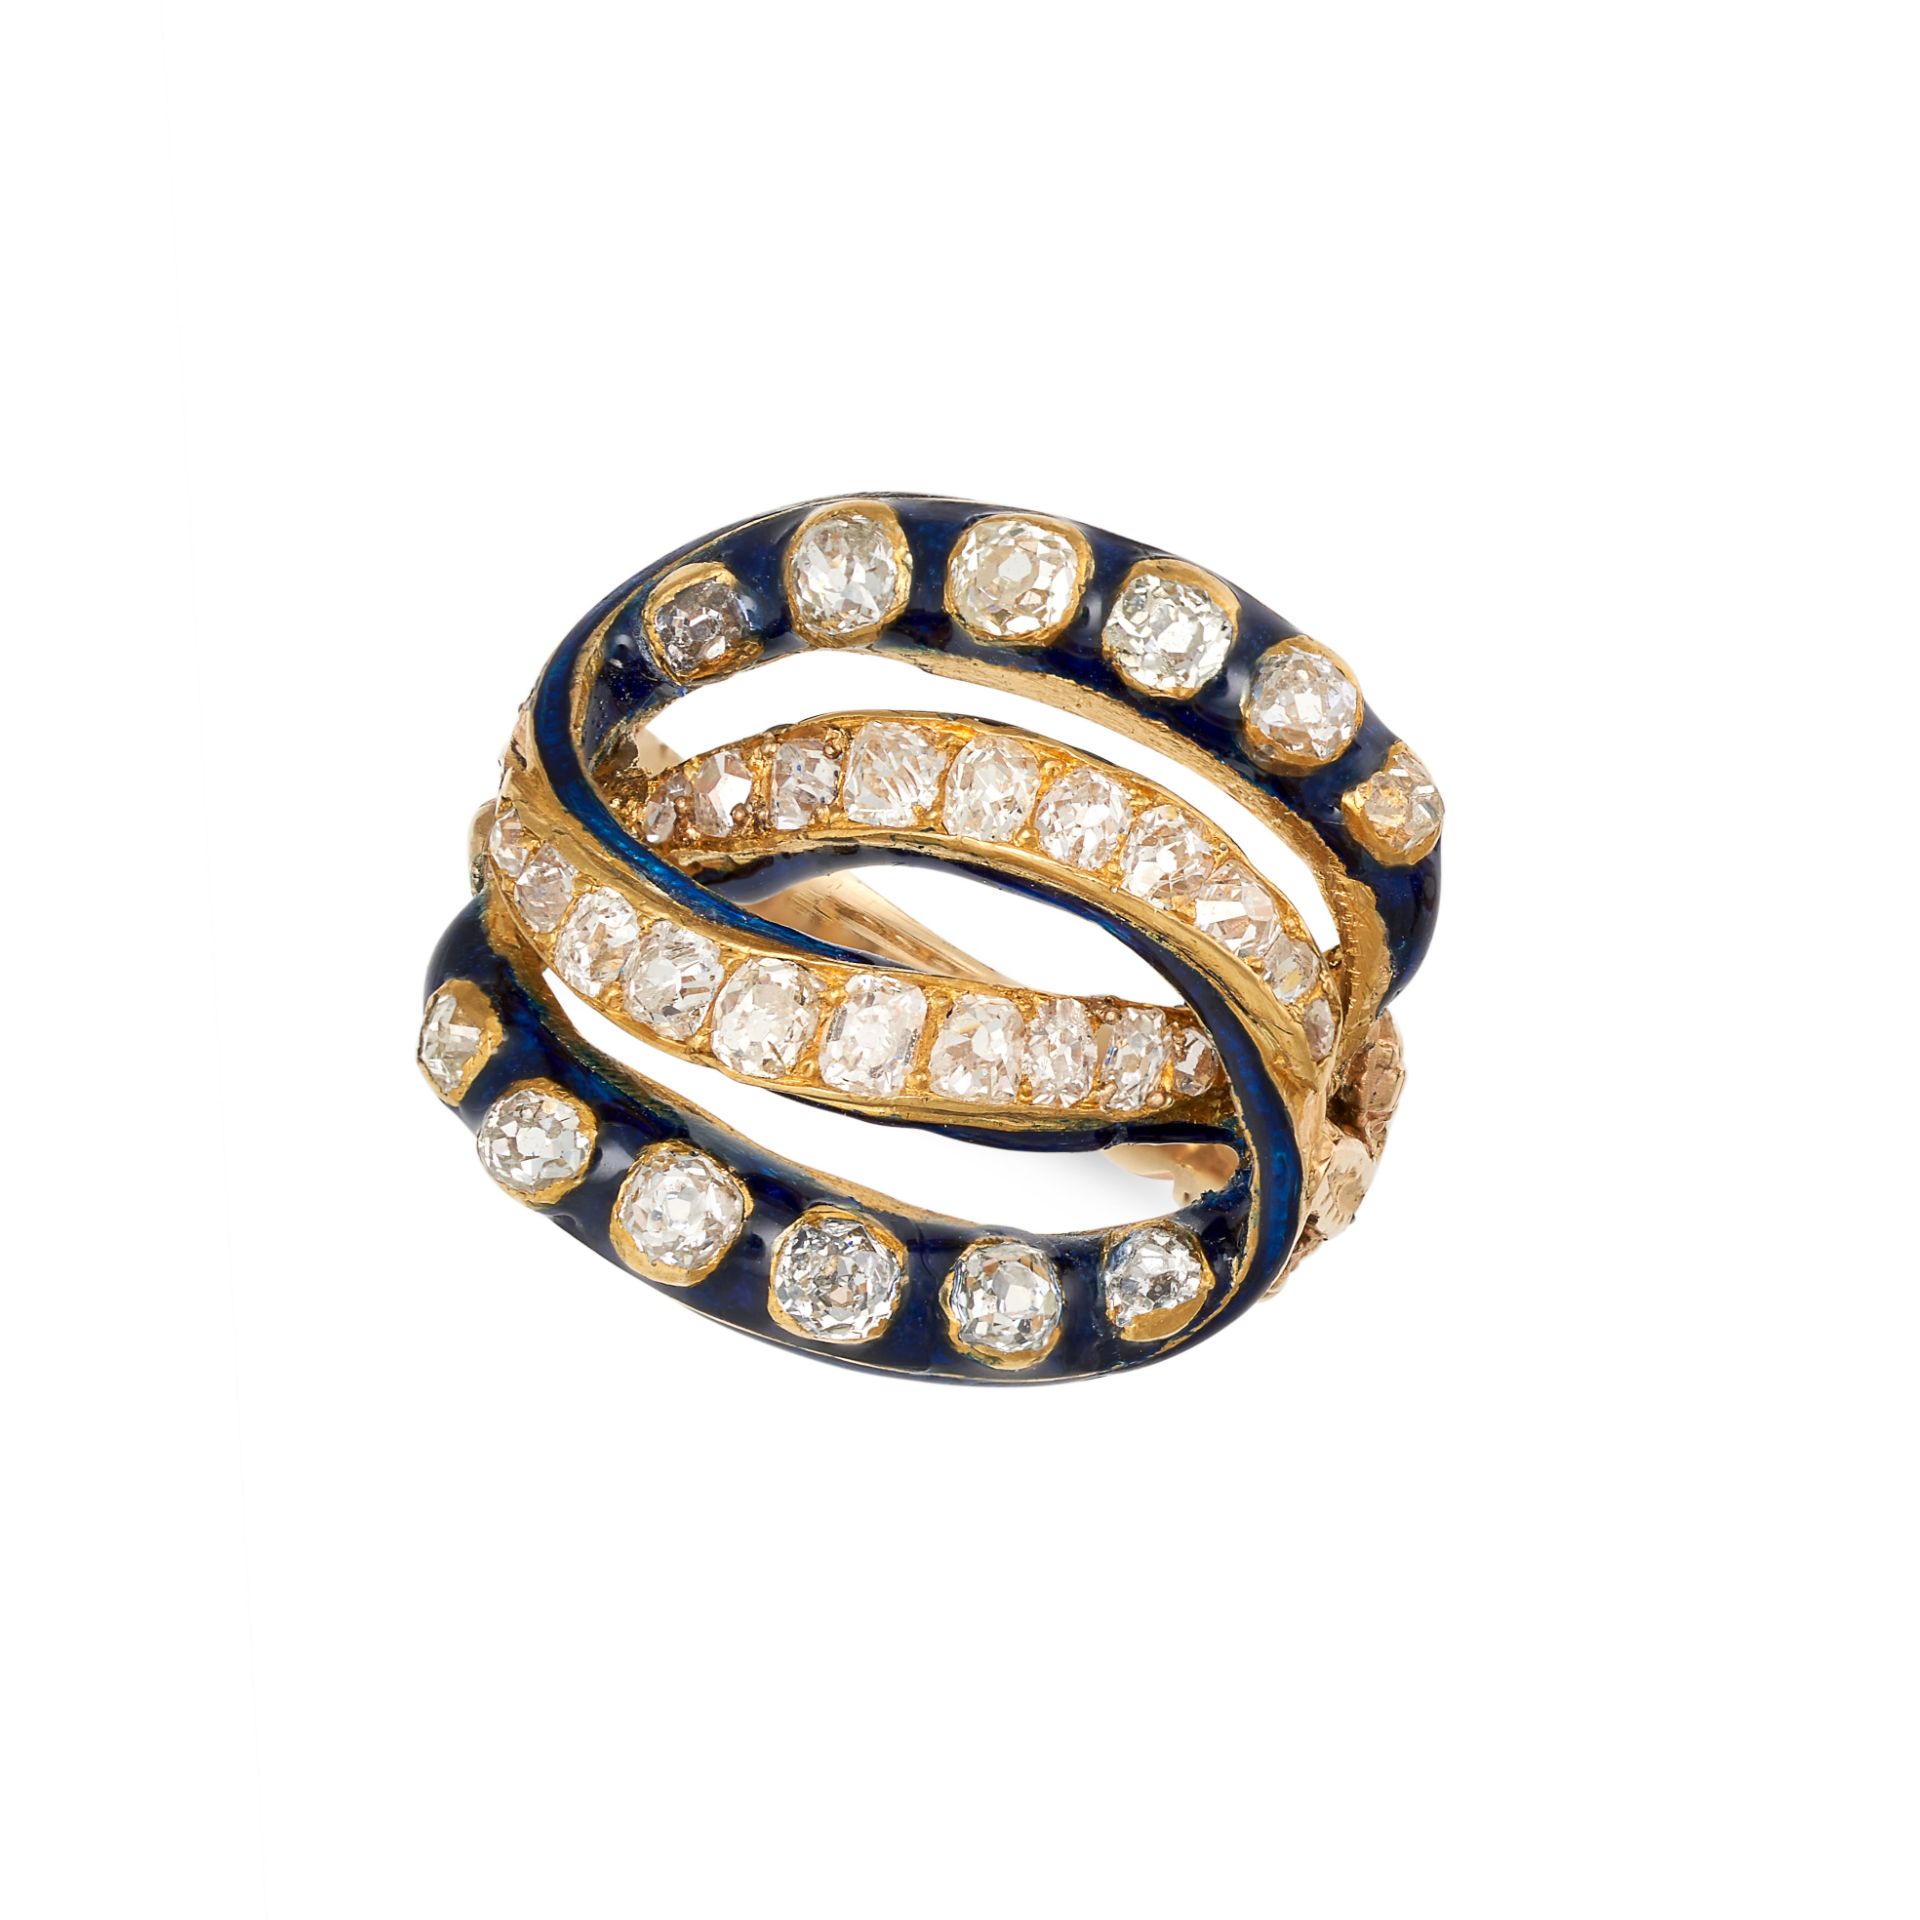 AN ANTIQUE ENAMEL AND DIAMOND RING in yellow gold, designed as interlocking hoops set with old cu...